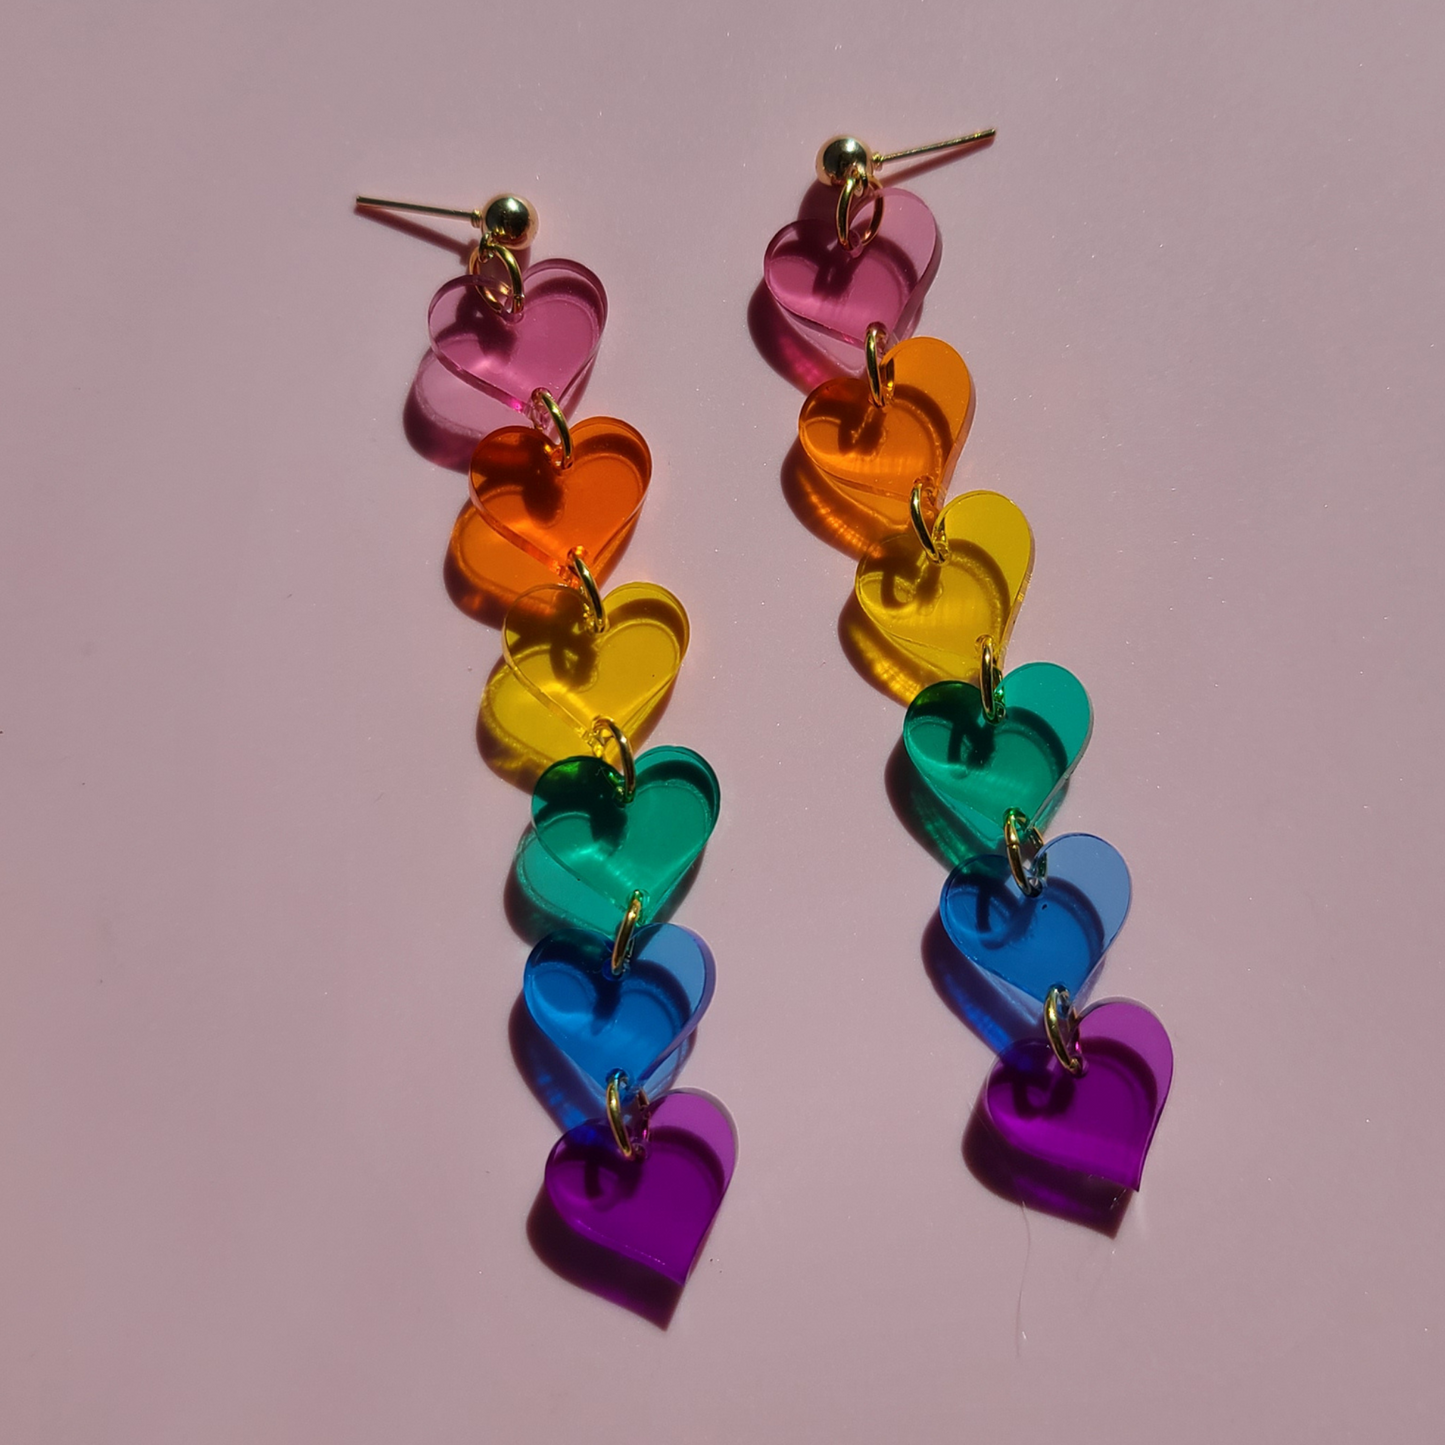 Rainbow Hearts with Translucent Acrylic - Pride - Earrings - Laser Cut